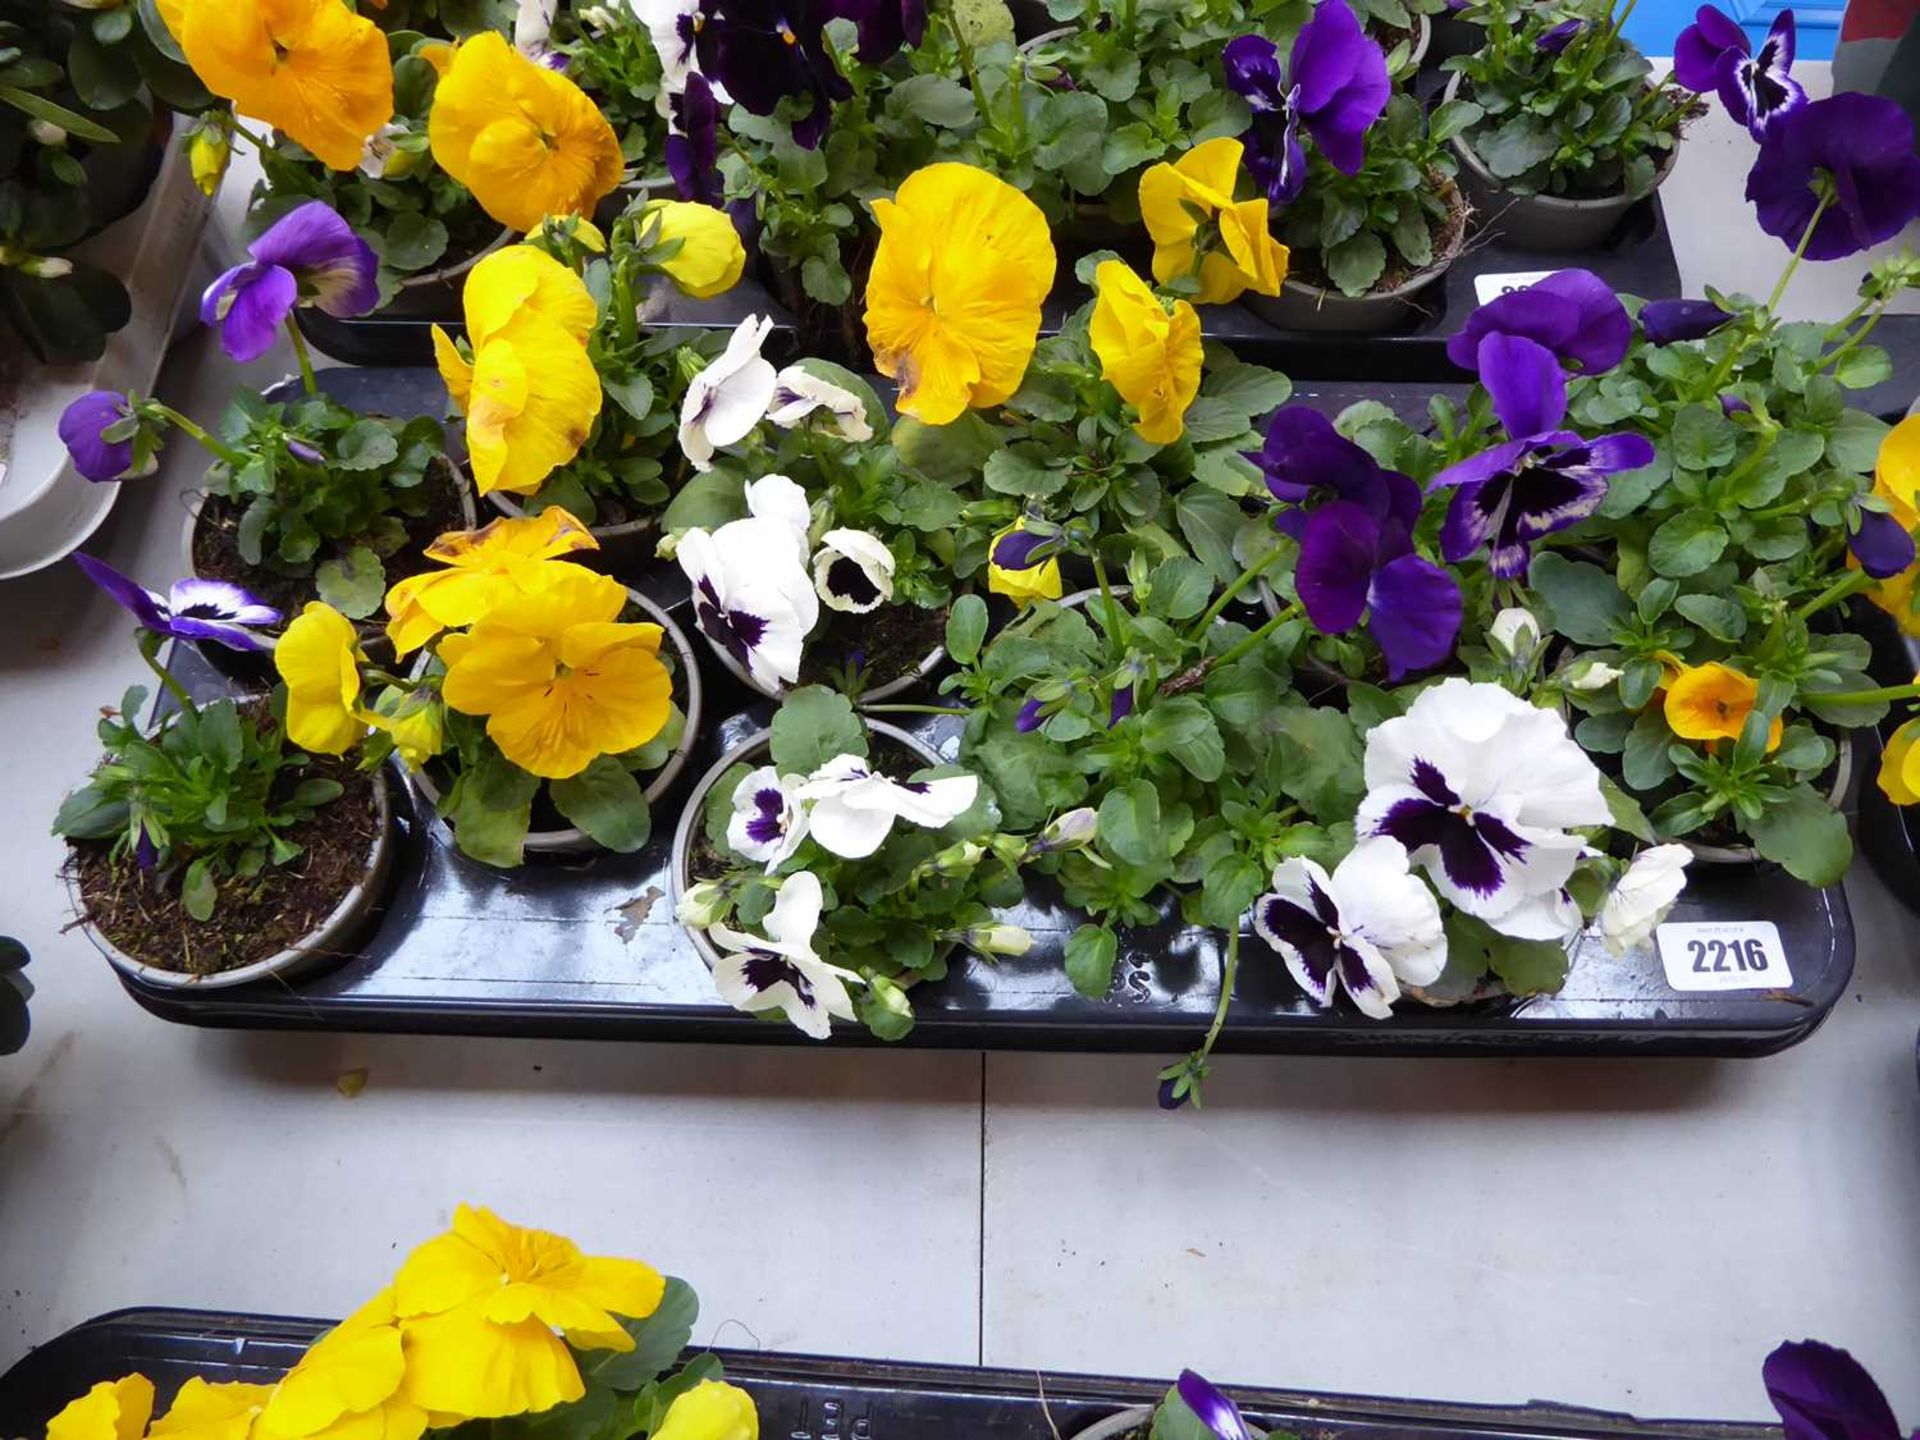 Tray containing 12 pots of pansies